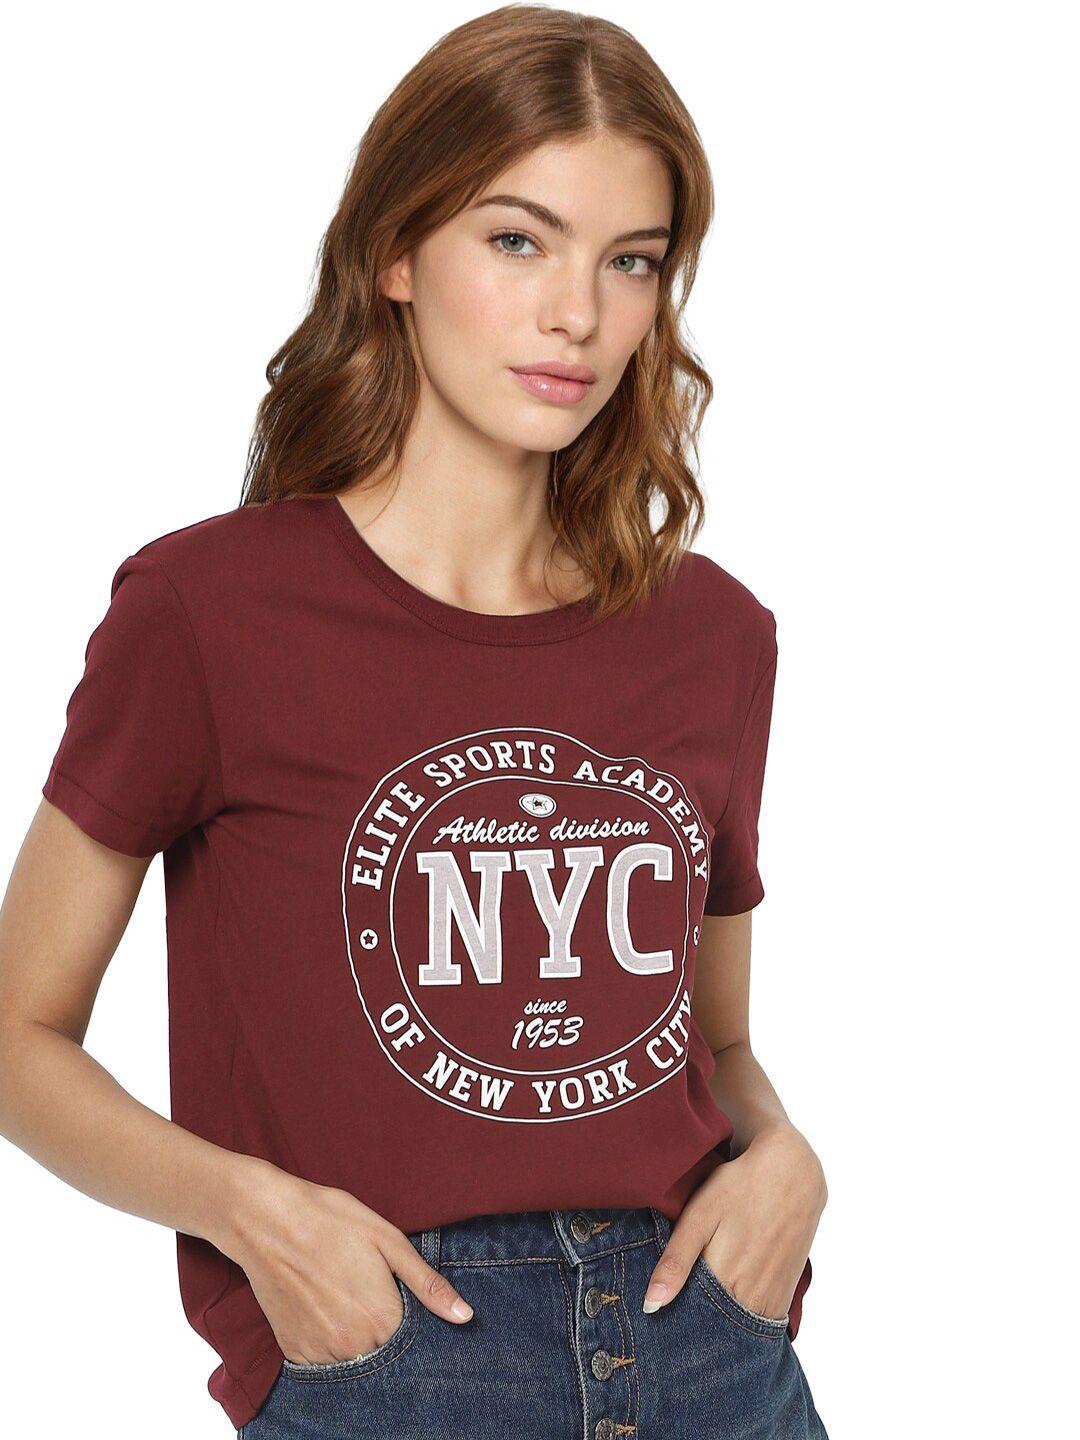 ONLY Women Maroon & White Typography Printed Cotton T-shirt